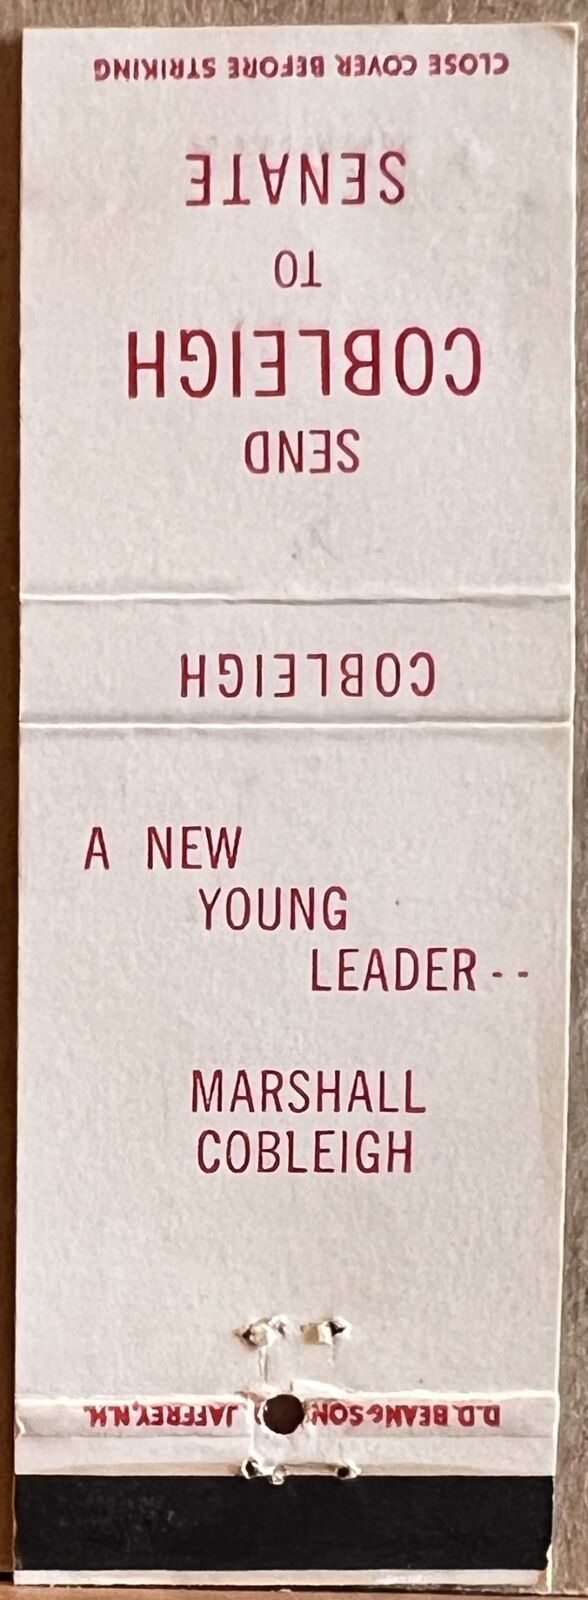 Elect Marshall Cobleigh Manchester NH New Hampshire to Senate Matchbook Cover